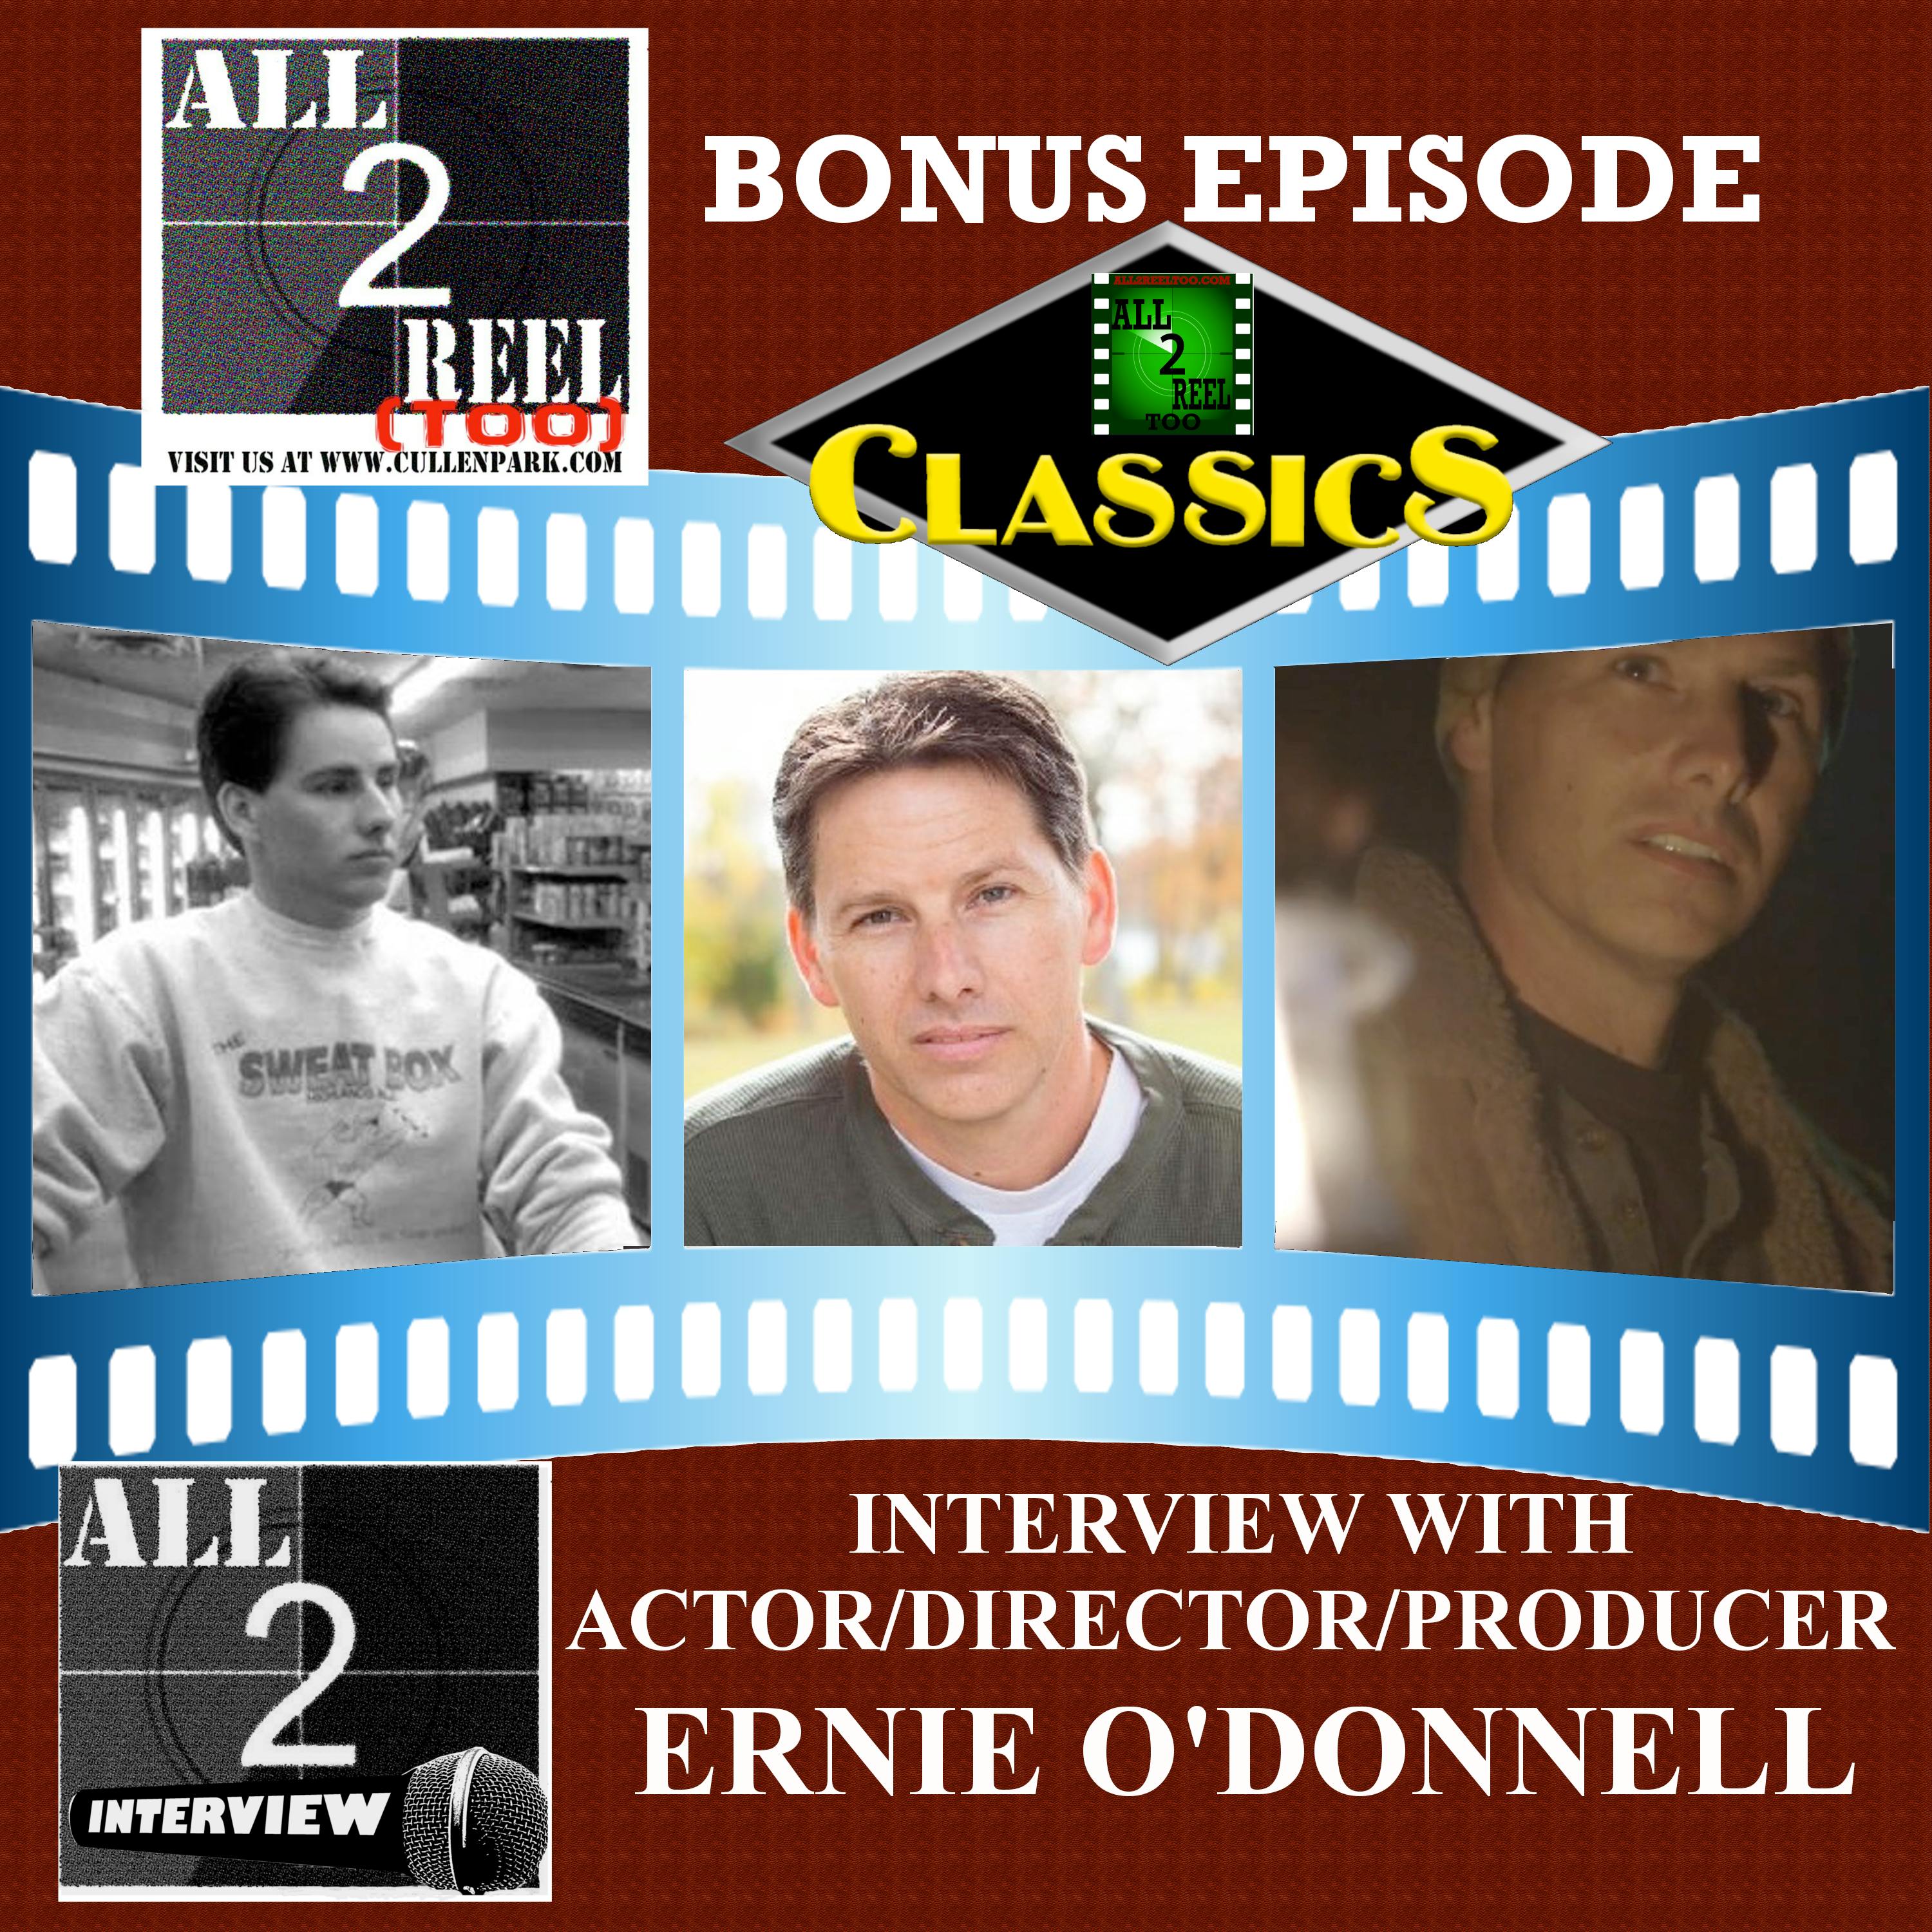 ALL2REELTOO CLASSICS - ERNIE O'DONNELL INTERVIEW Image